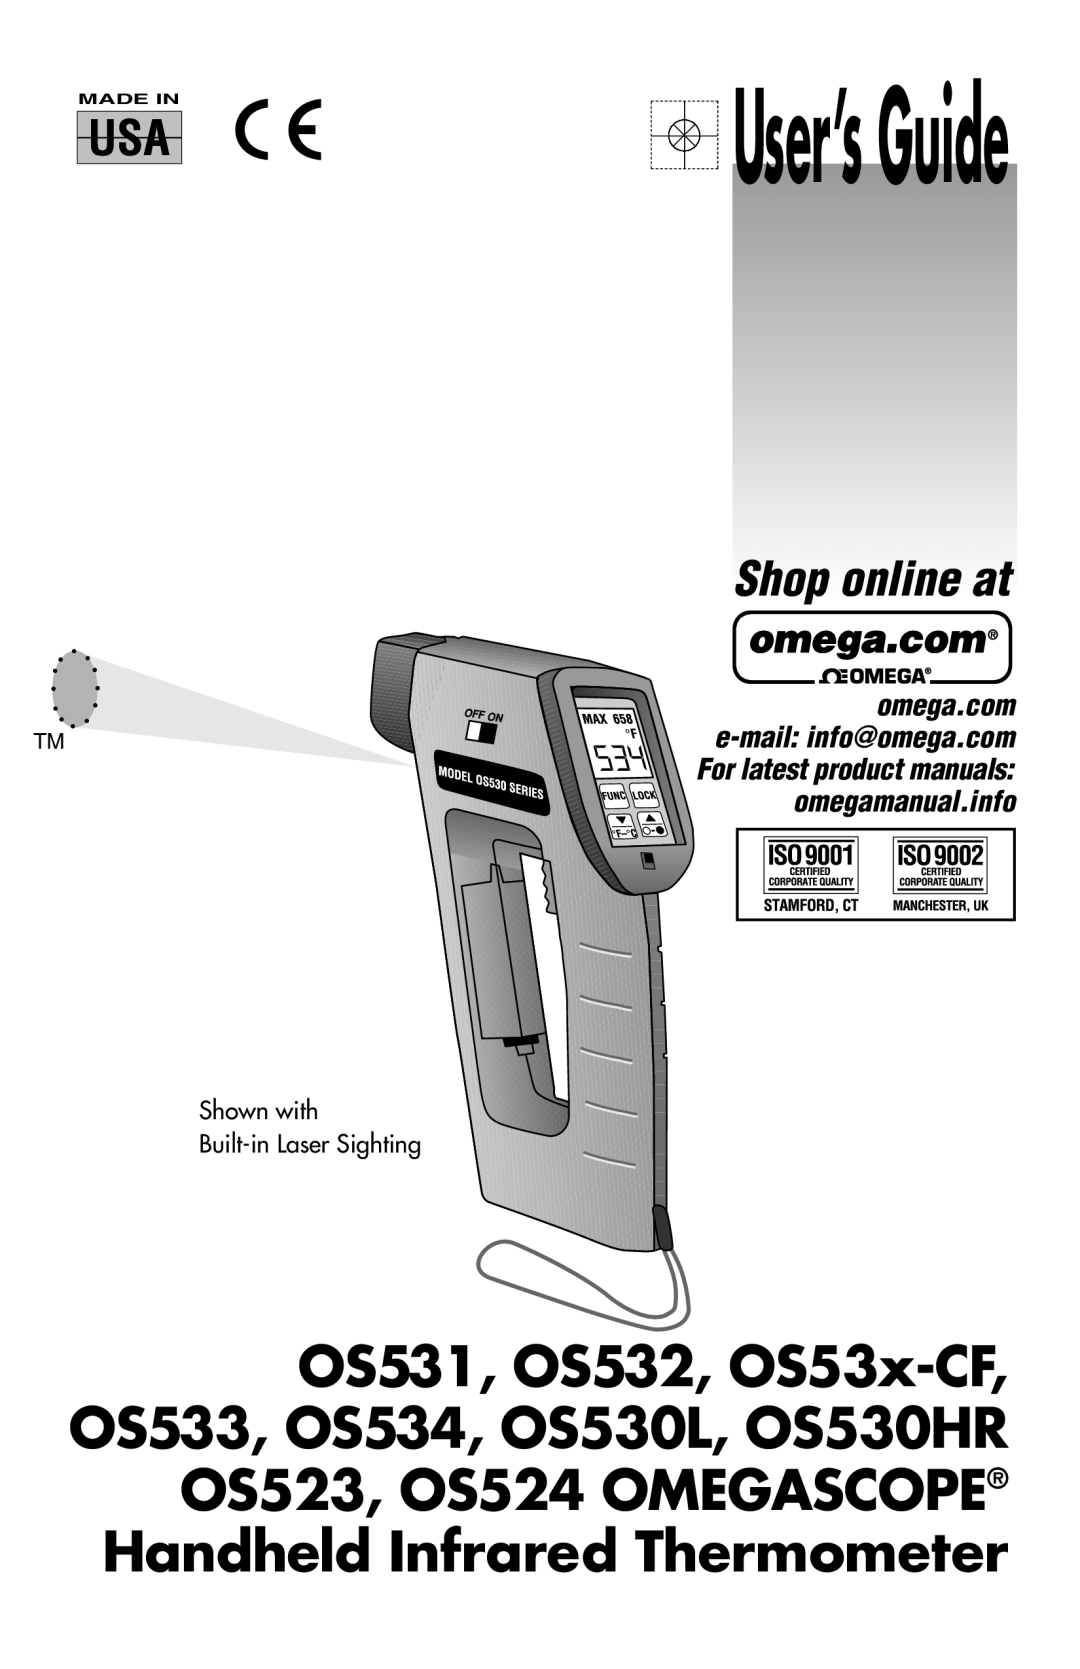 Omega Engineering manual User’s Guide, OS531, OS532, OS53x-CF OS533, OS534, OS530L, OS530HR, Shop online at, Made In 